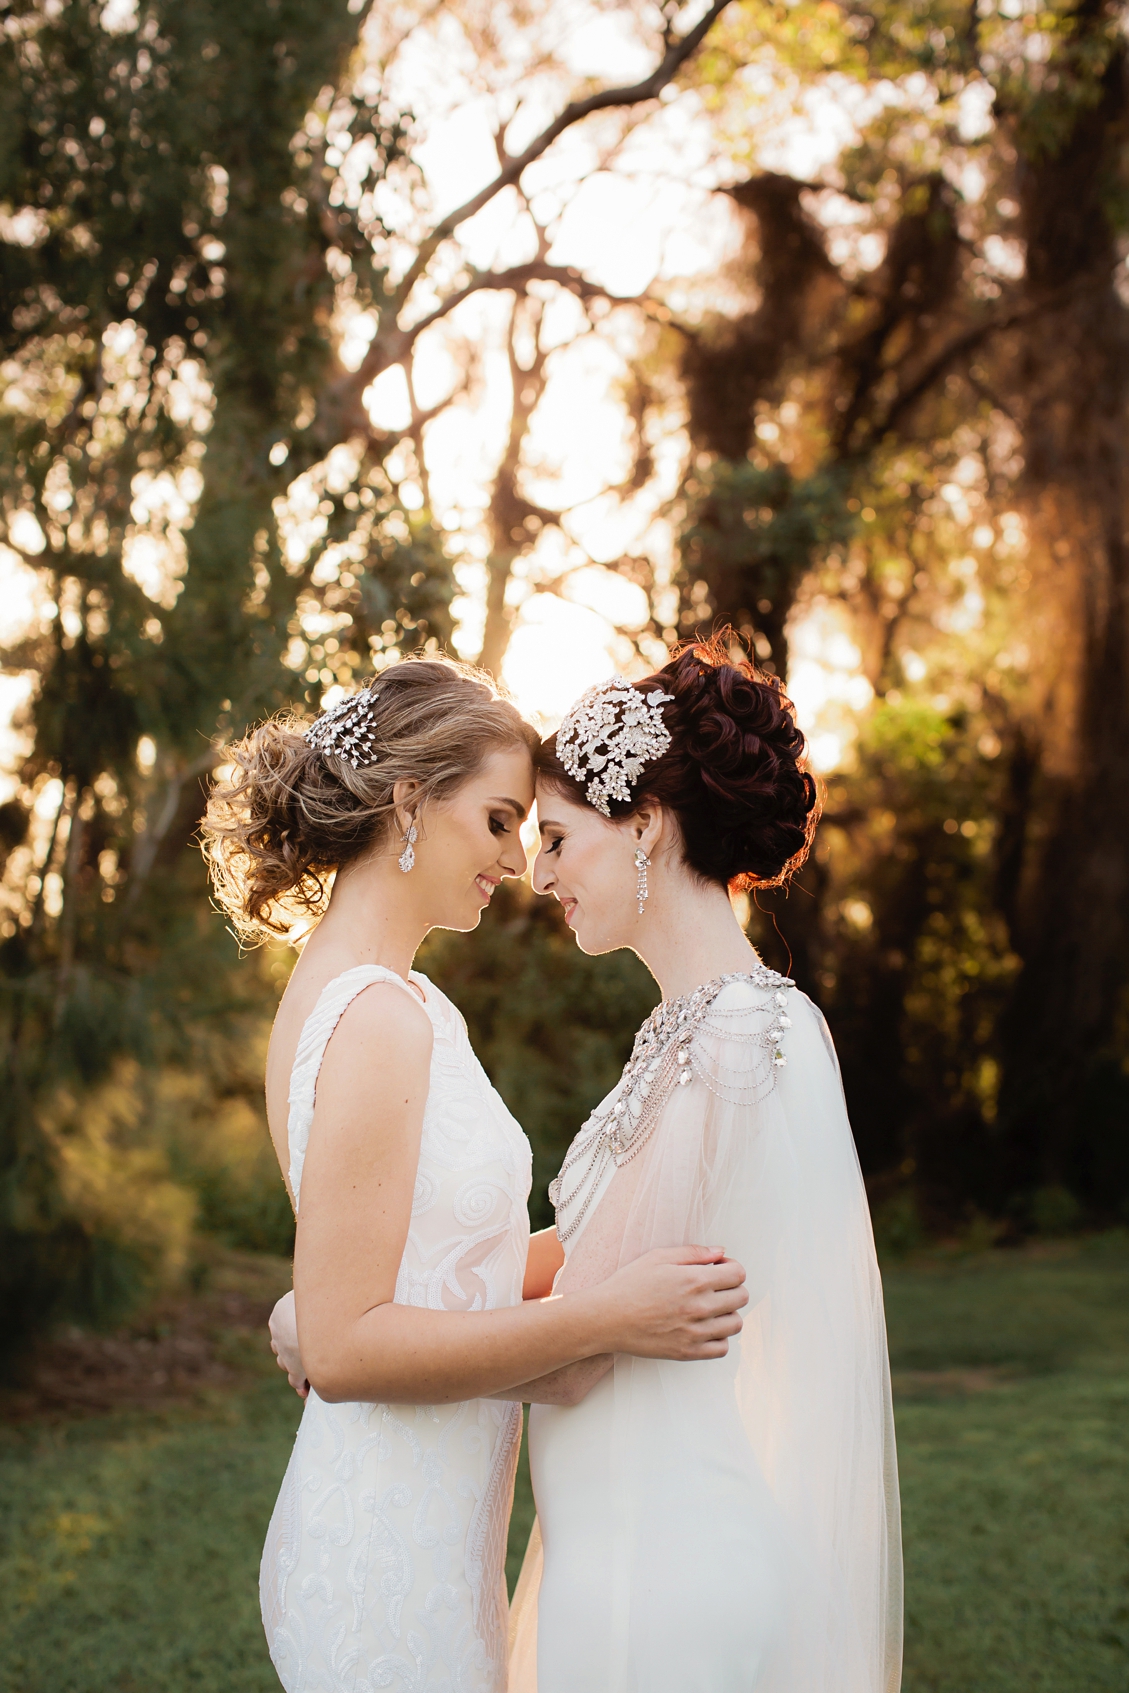 Hillstone-St-Luica-Same-Sex-Style-Shoot-Photographer-Quincenmulberry_0001